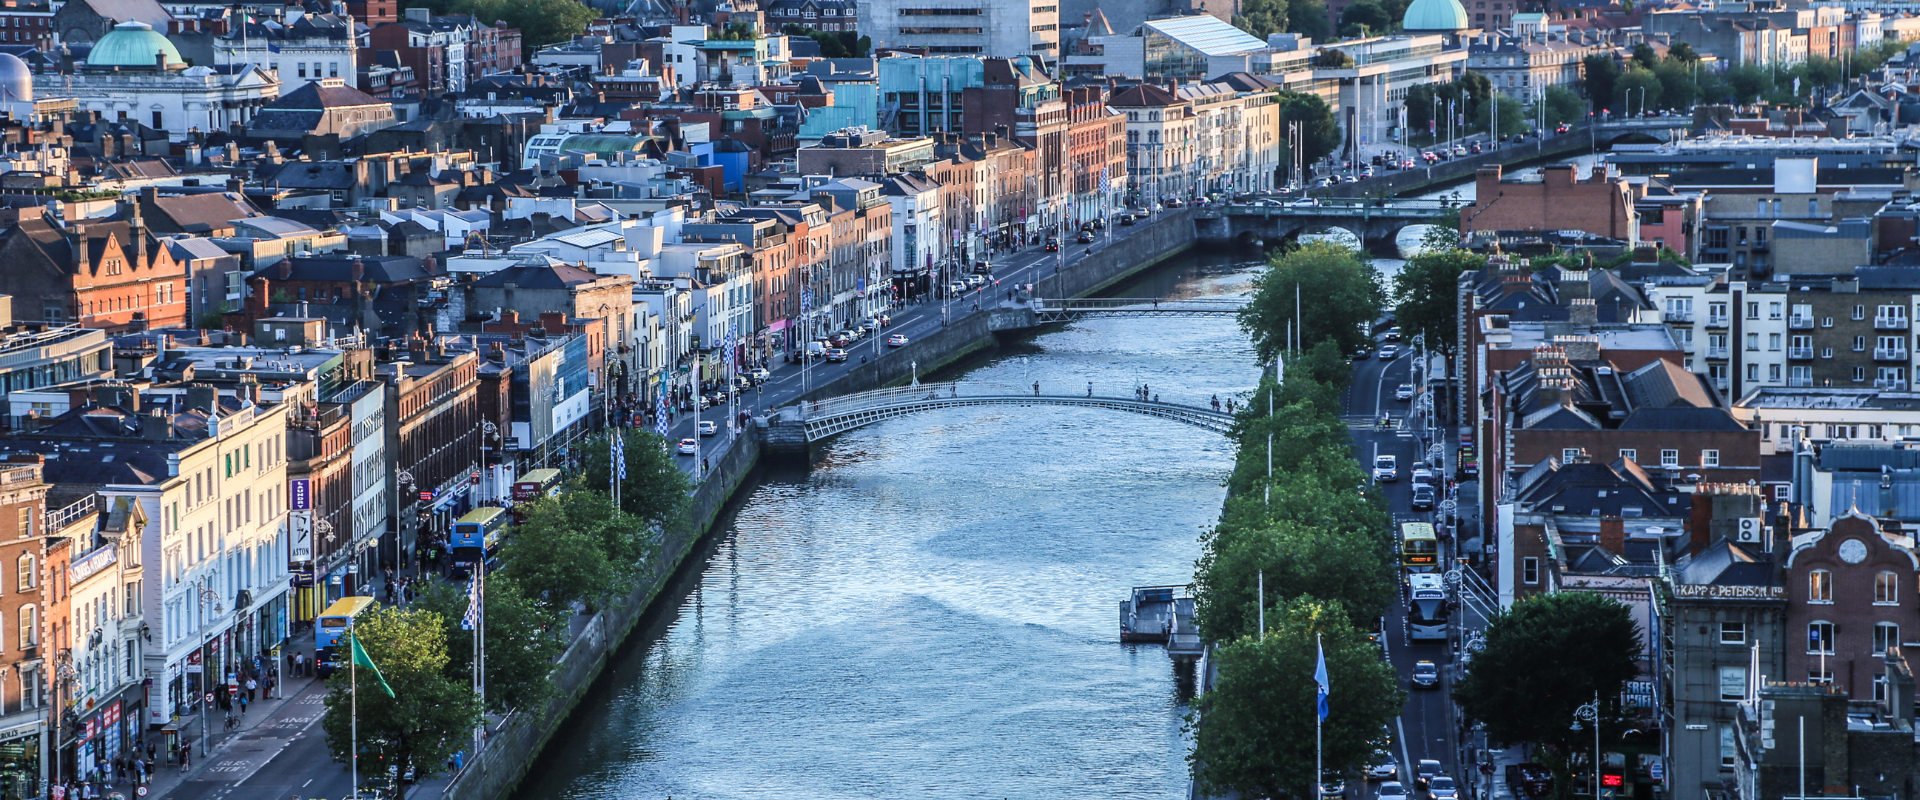 the river liffey from above